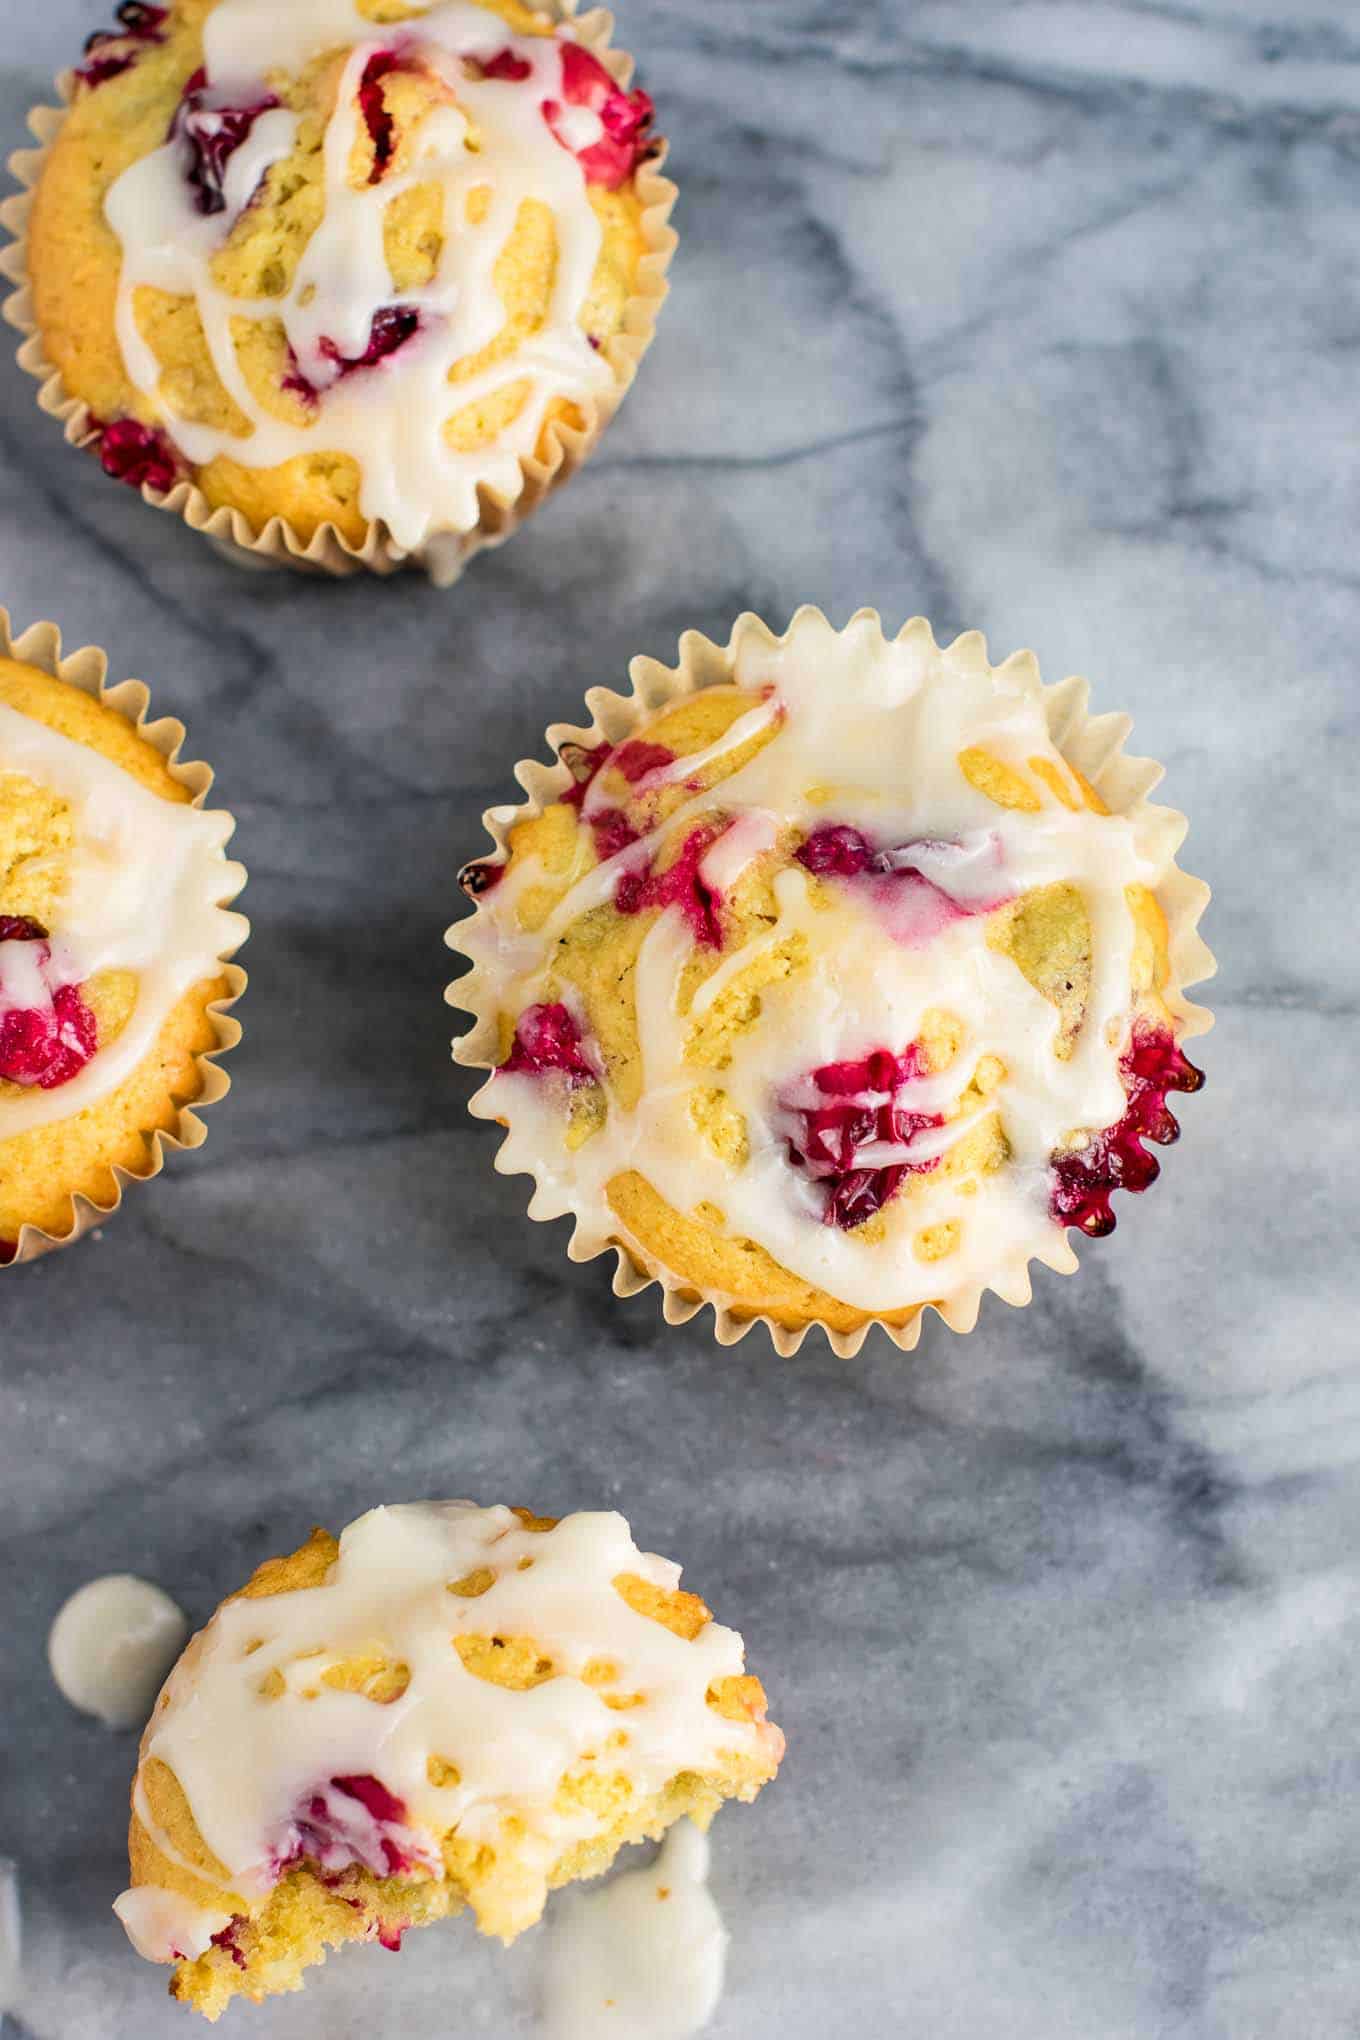 These cranberry cream cheese muffins are so delicious! Perfect homemade Christmas breakfast! #cranberry #cranberrymuffins #breakfast #christmas